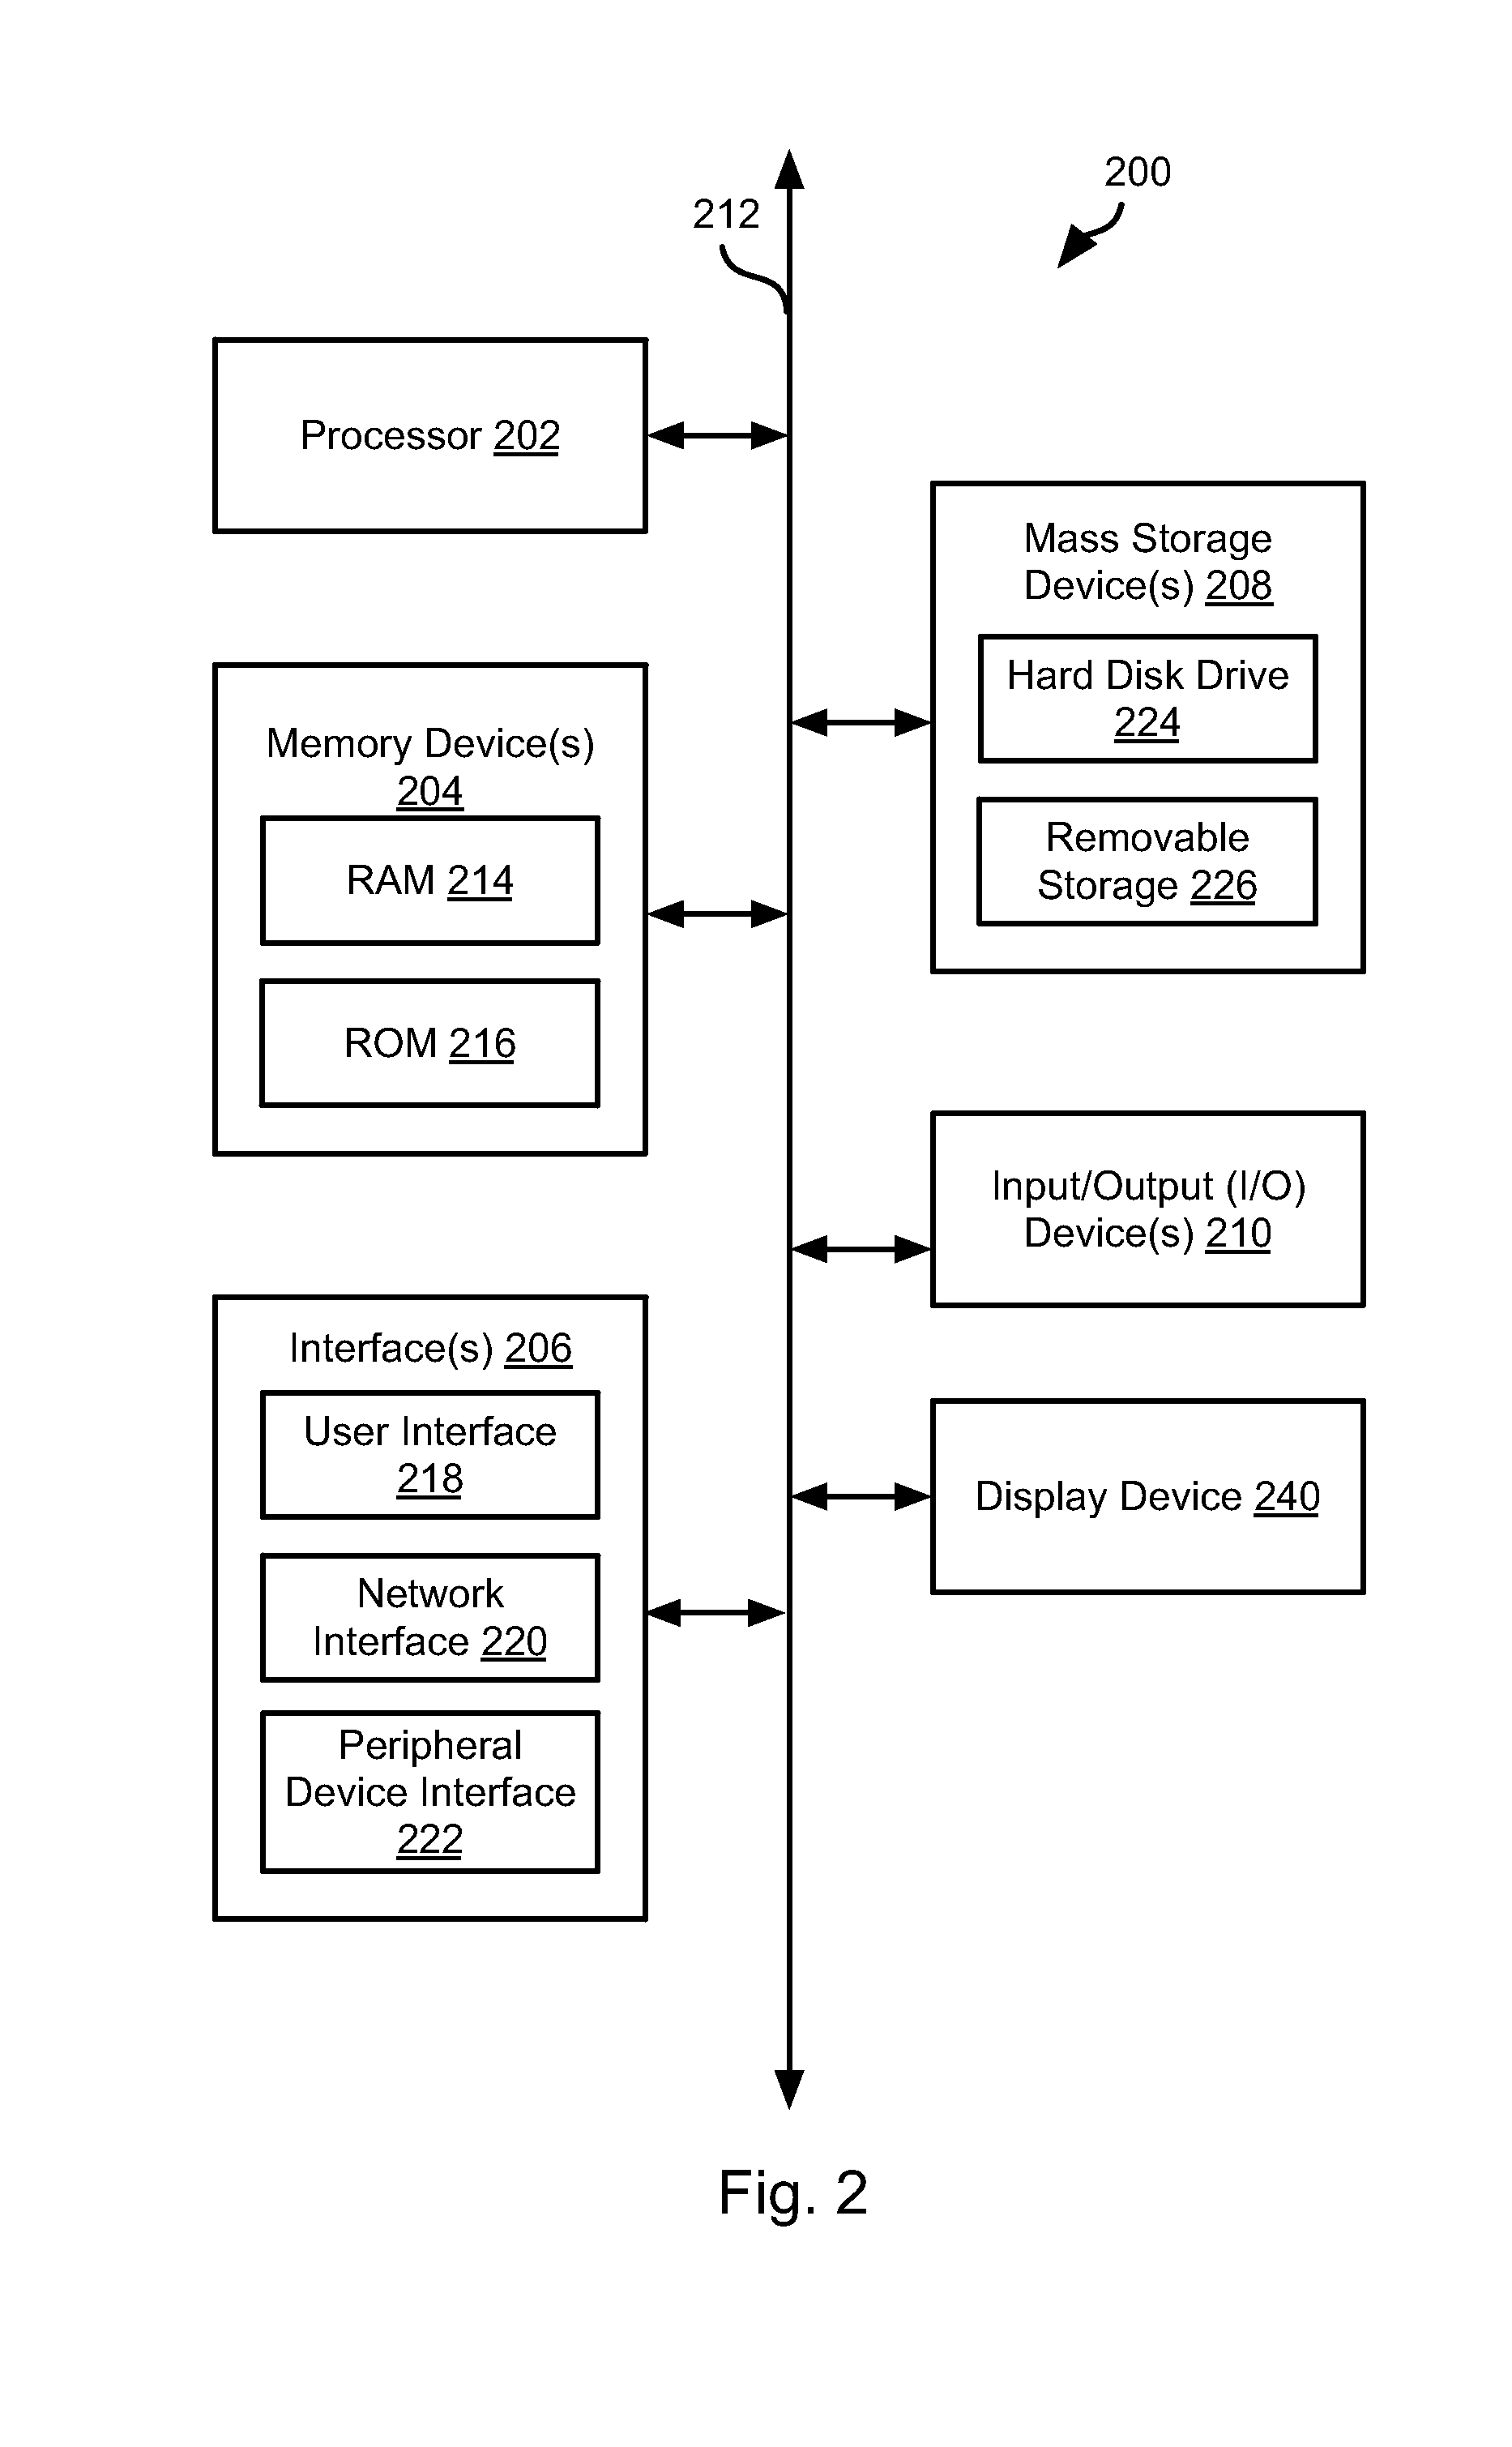 Product Record Normalization System With Efficient And Scalable Methods For Discovering, Validating, And Using Schema Mappings